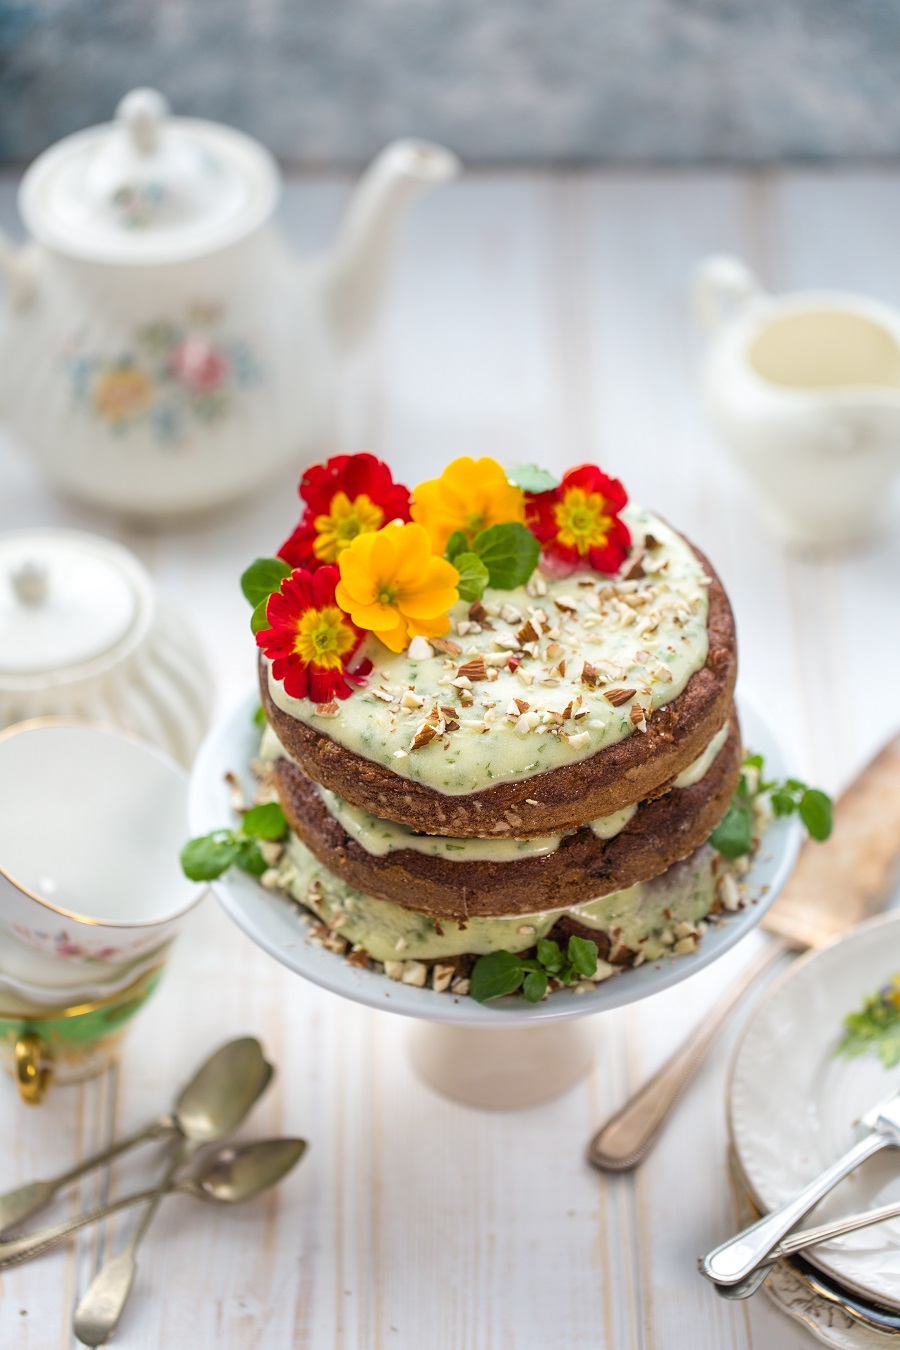 Carrot Cake with Watercress & Cream Cheese Frosting (vegan and gluten free)